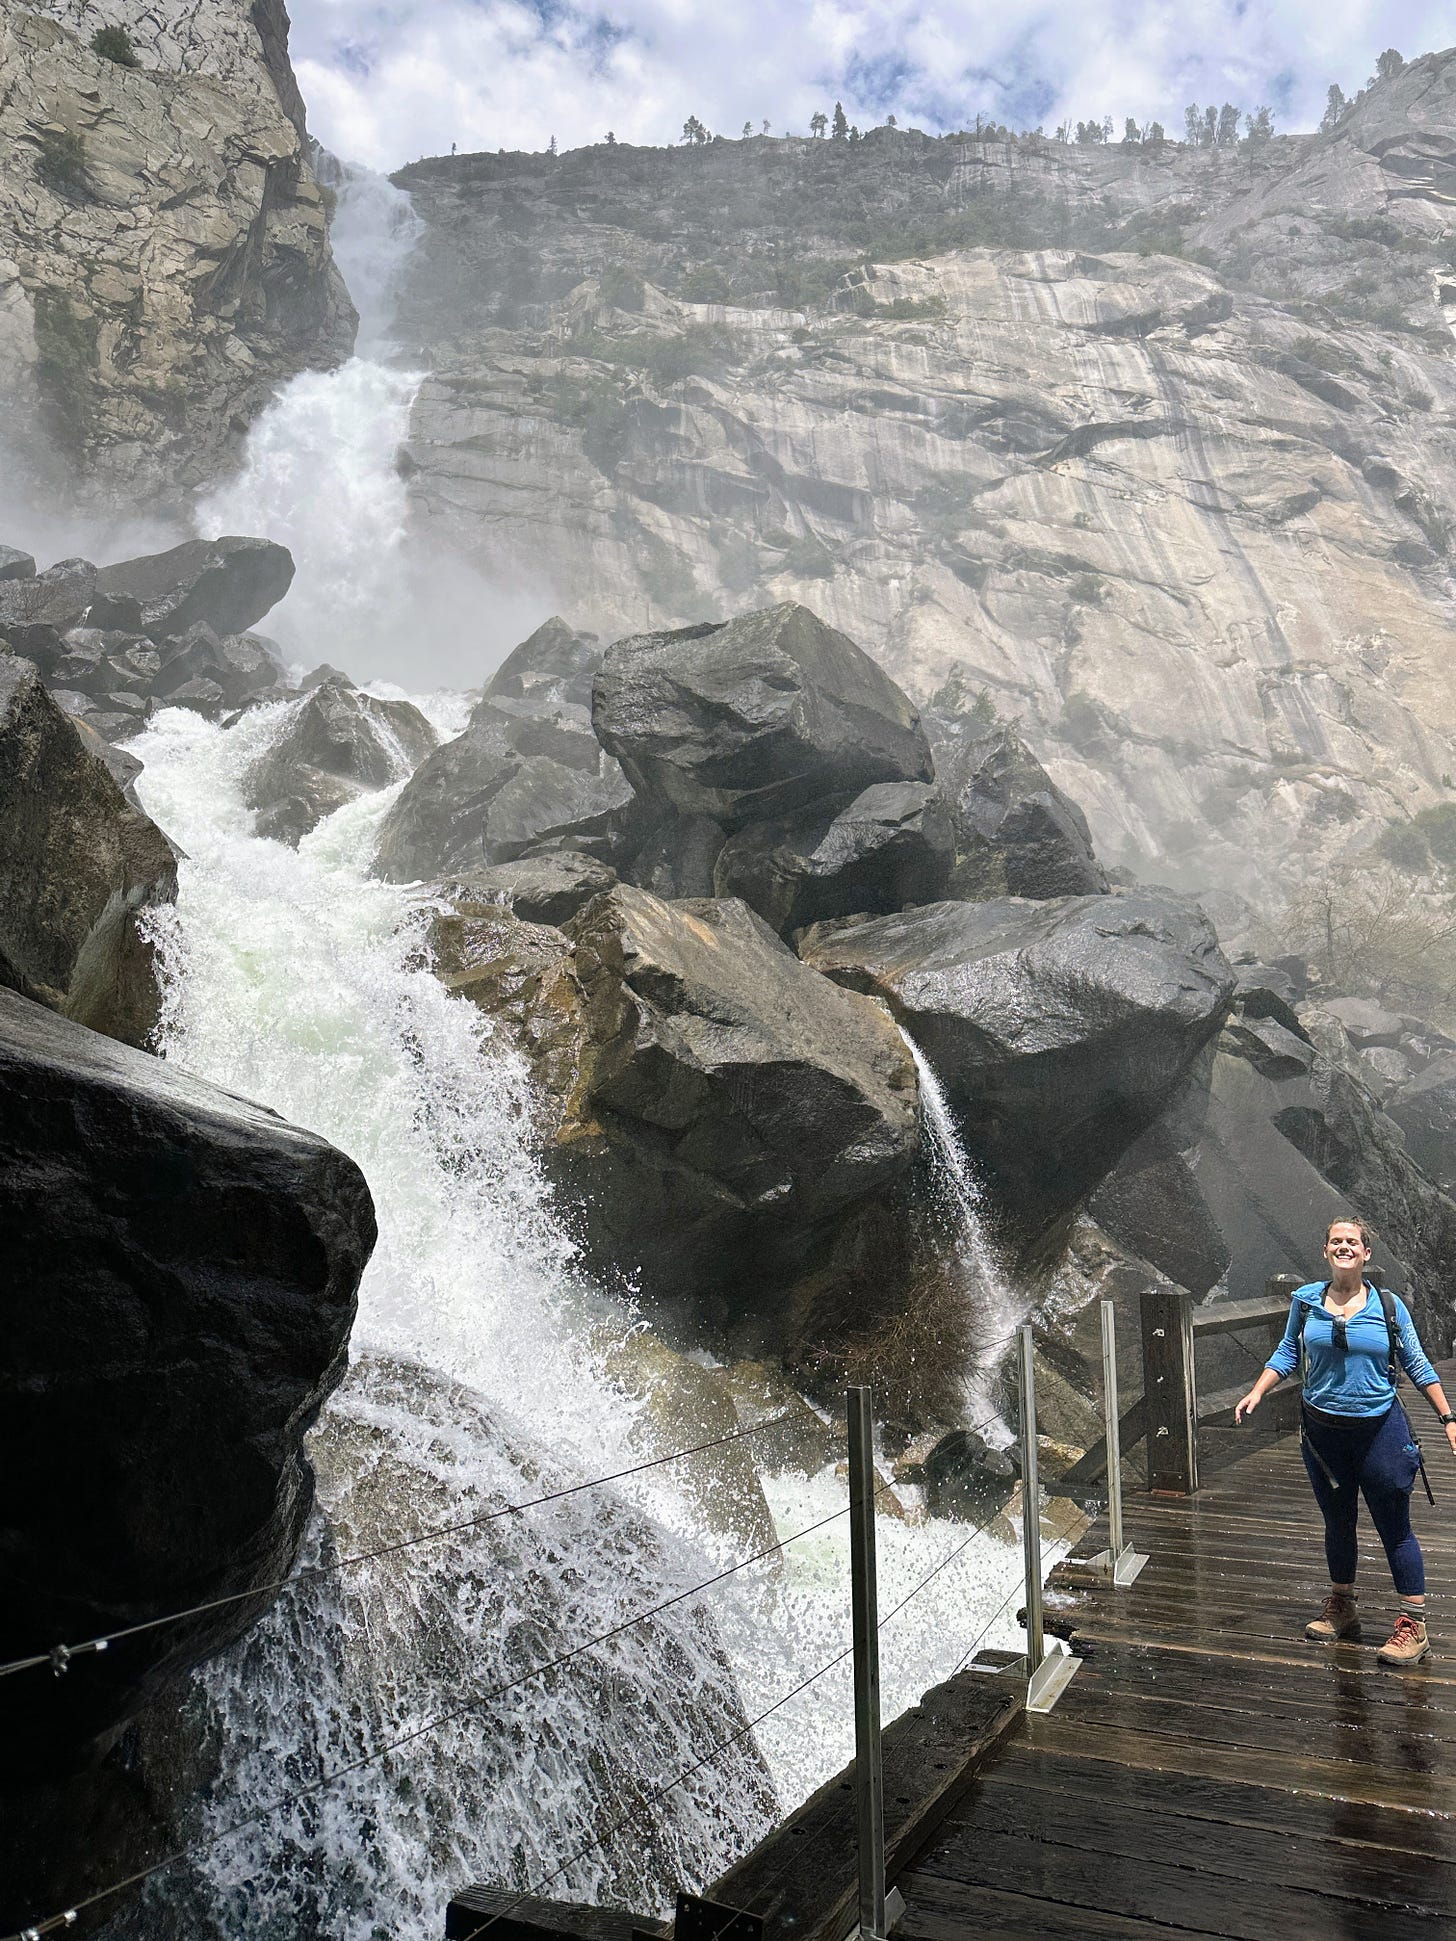 white woman in black yoga pants and blue long sleev shirt standing on a bridge by a roaring waterfall in Yosemite. She is wet and smiling